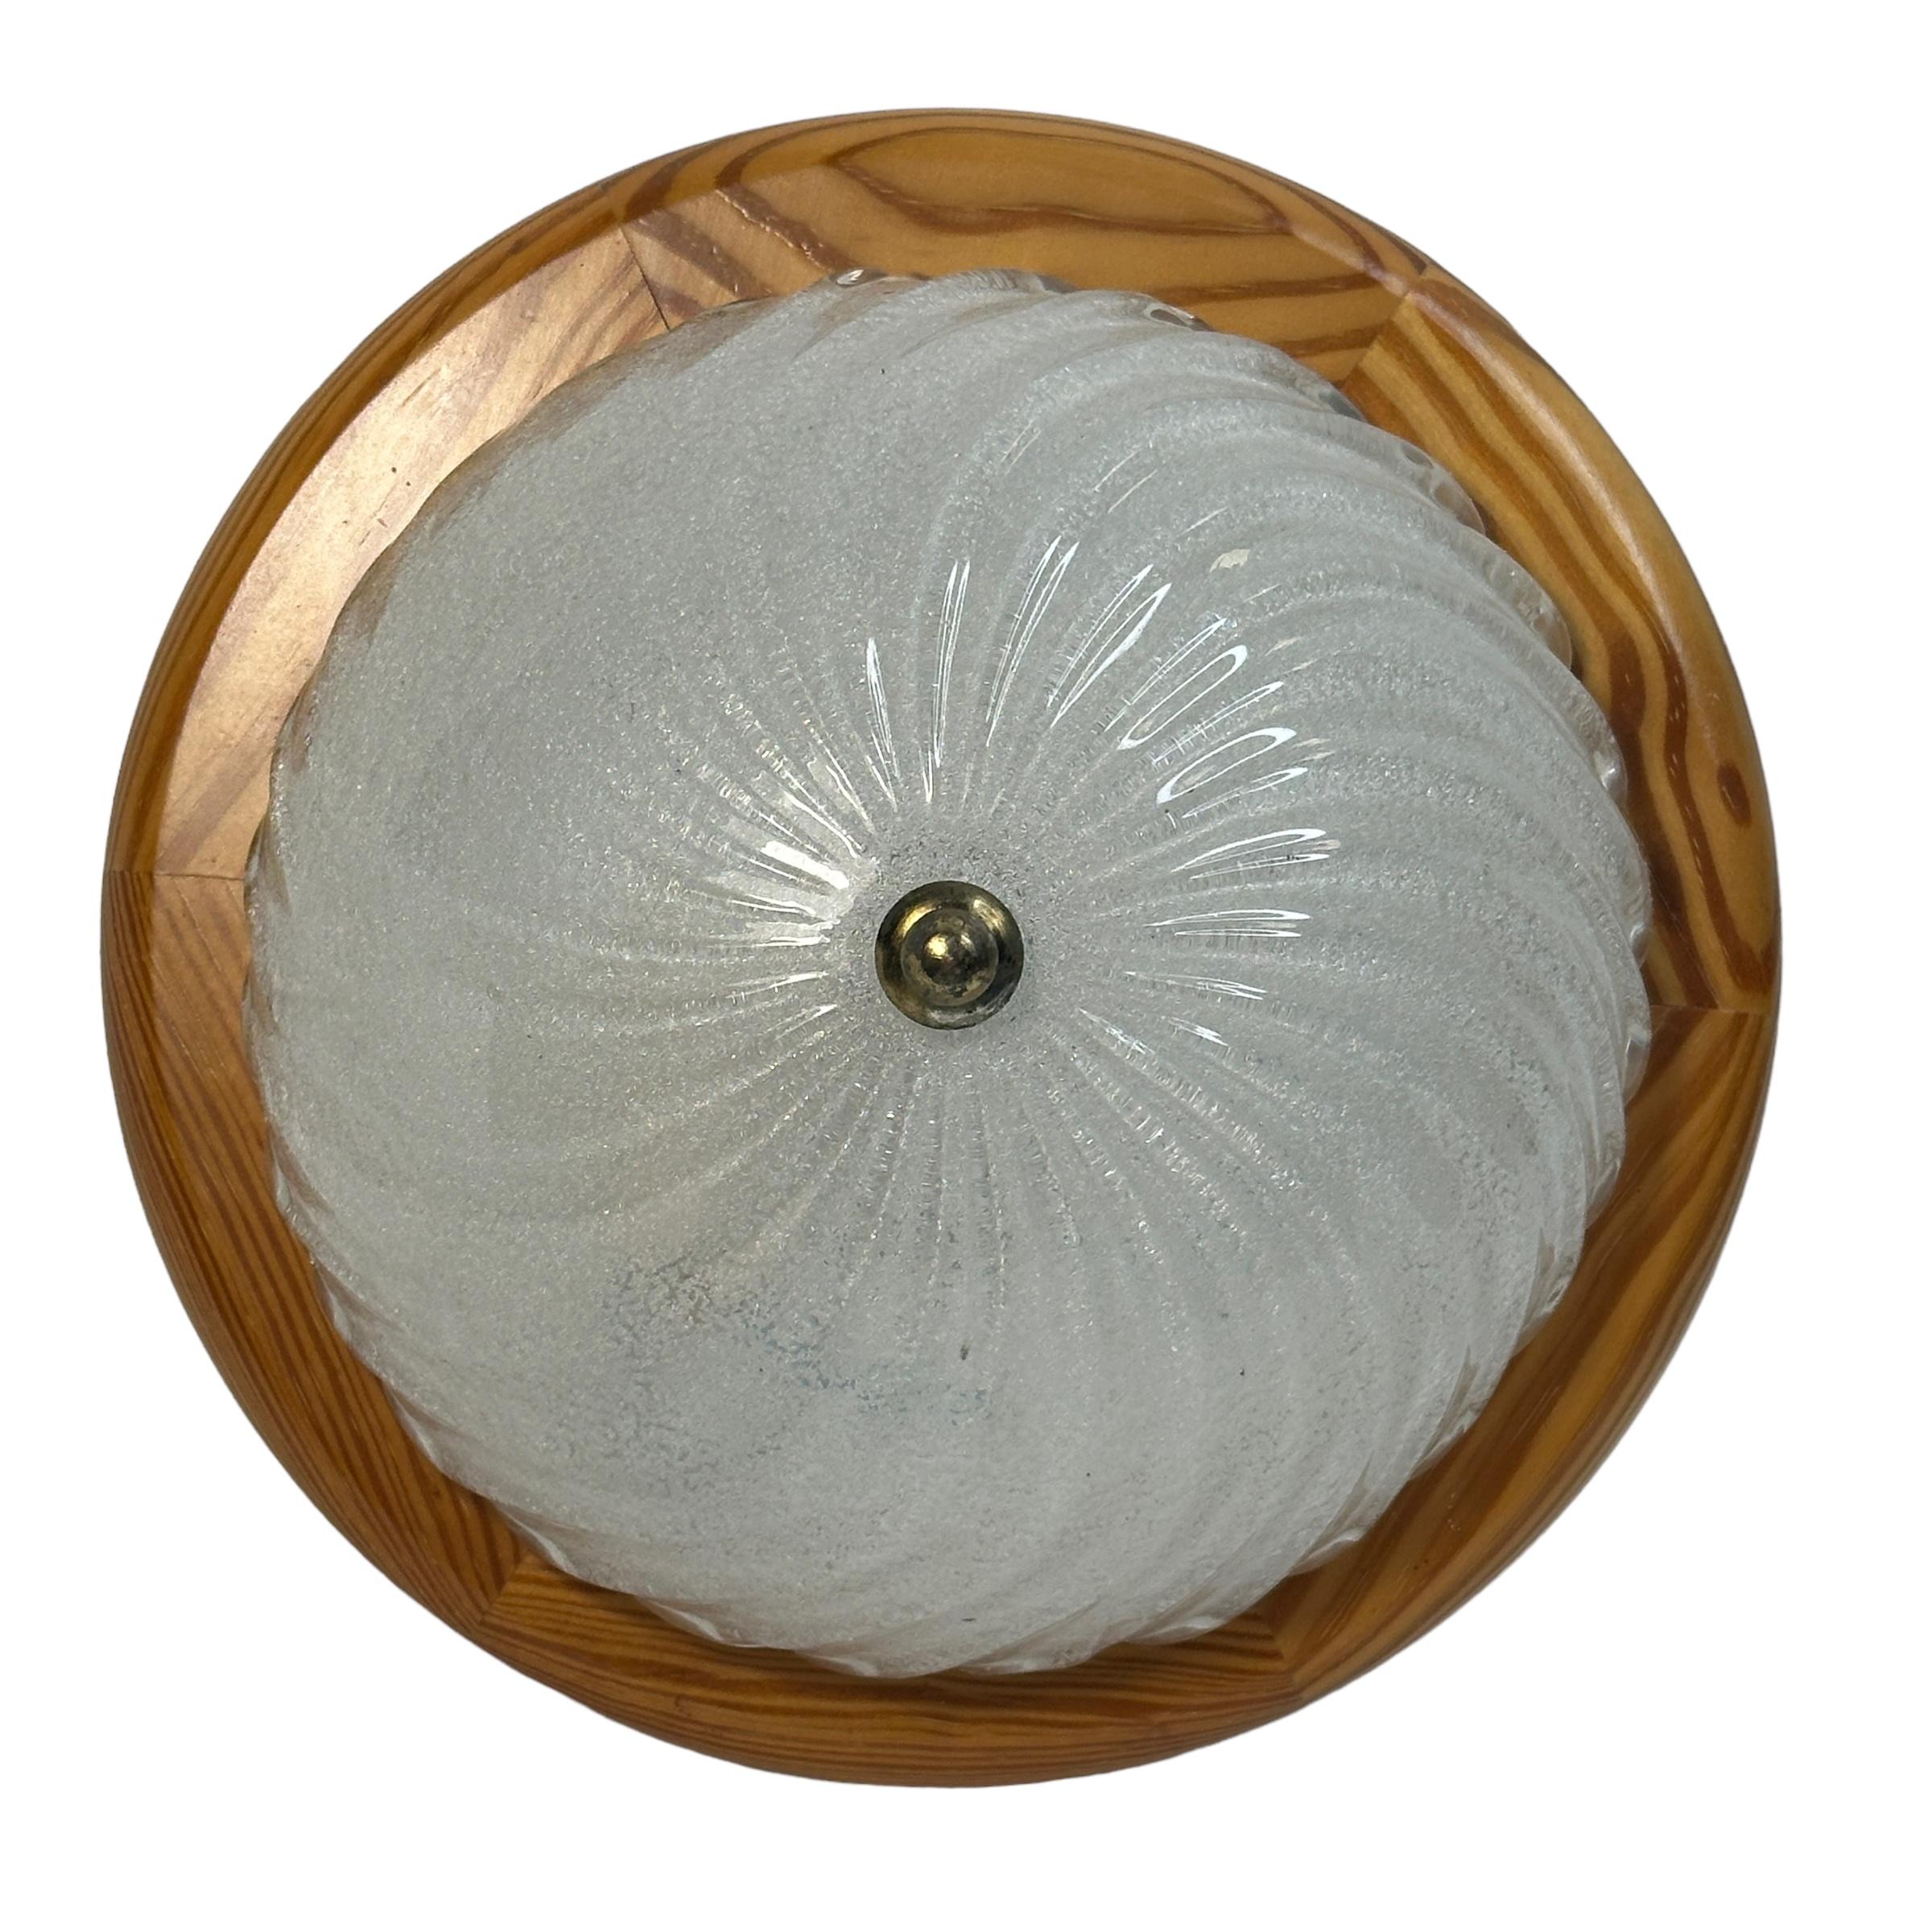 A beautiful ice glass flush mount. Made in Austria in the 1970s. Gorgeous textured glass flush mount with metal fixture and a wooden frame. The Fixture requires one European E27 / 110 Volt Edison bulb, up to 60 watts. A nice addition to any room.